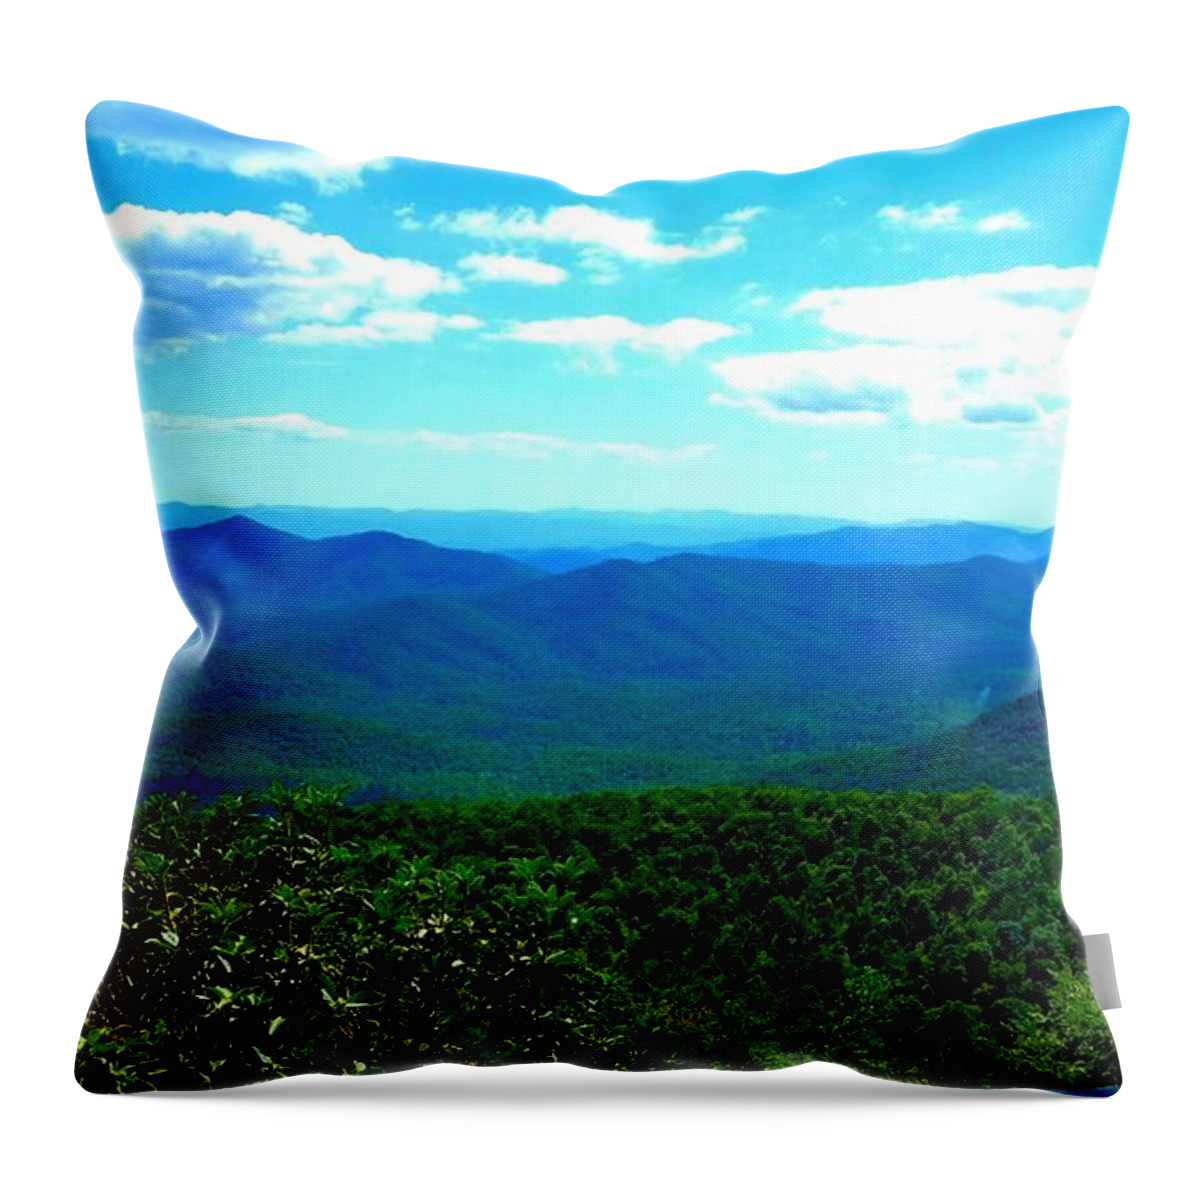 Blue Hue Mountains Throw Pillow featuring the photograph Beautiful Blue Mountain Views by Stacie Siemsen